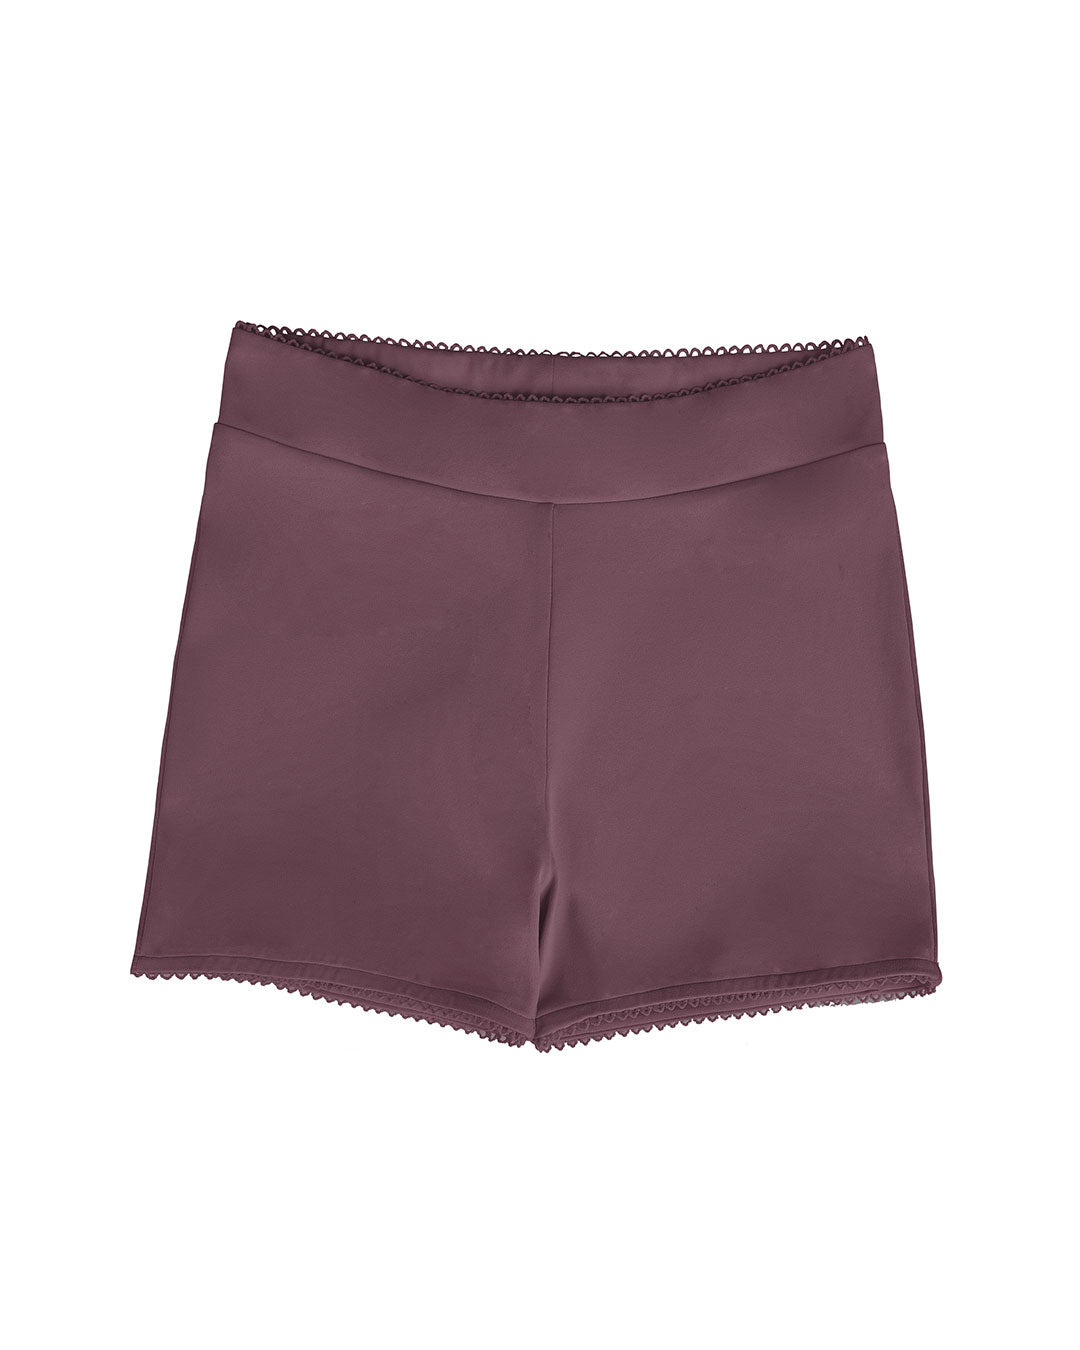 Lace Stretch Shorts - Chocolate Cherry